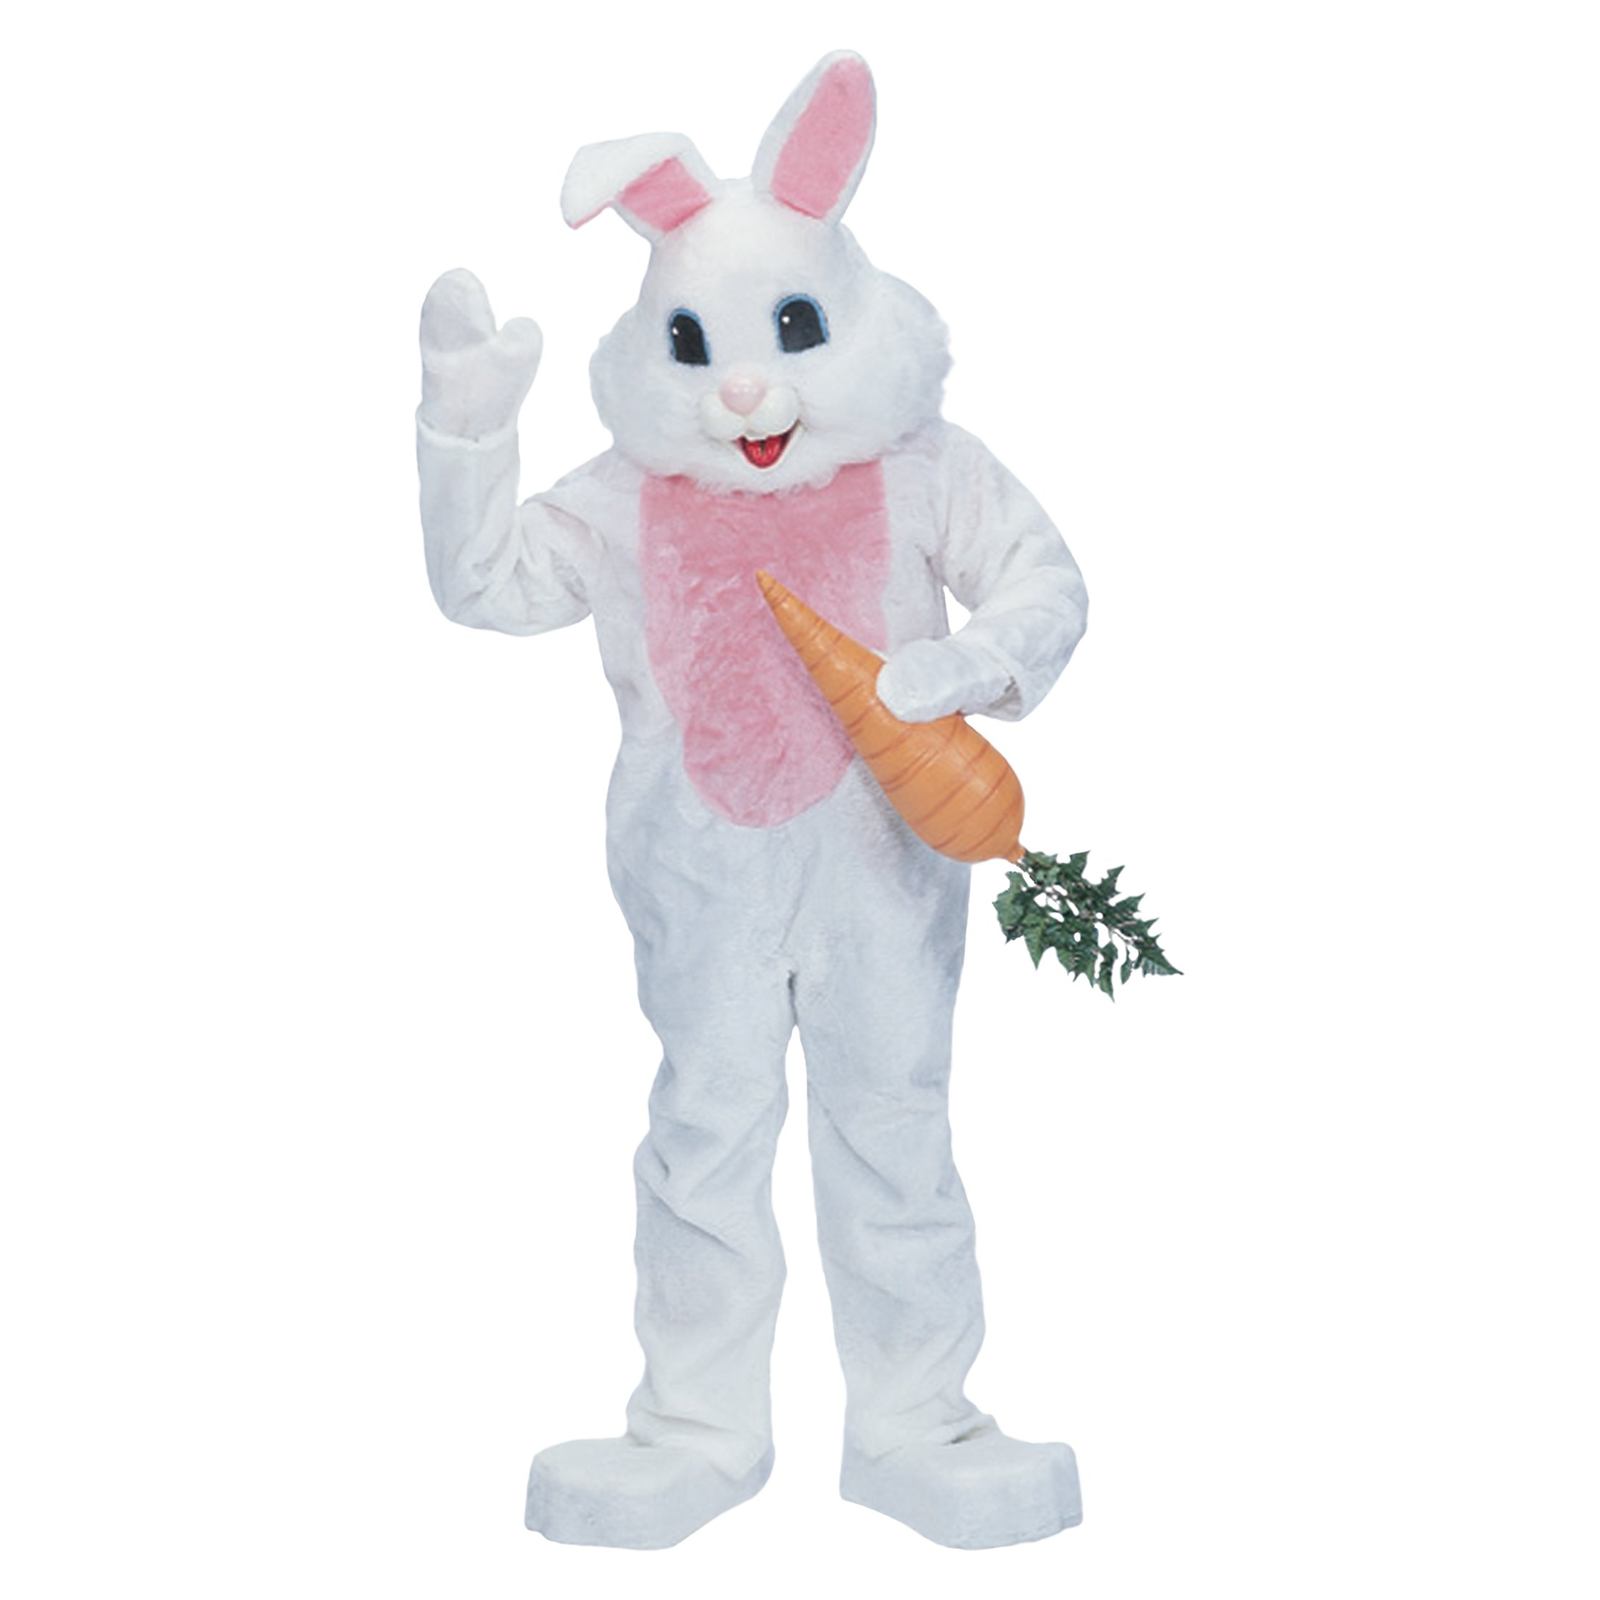 Primary image for Easter Bunny Costume Rental / Friendly Bunny / Professional